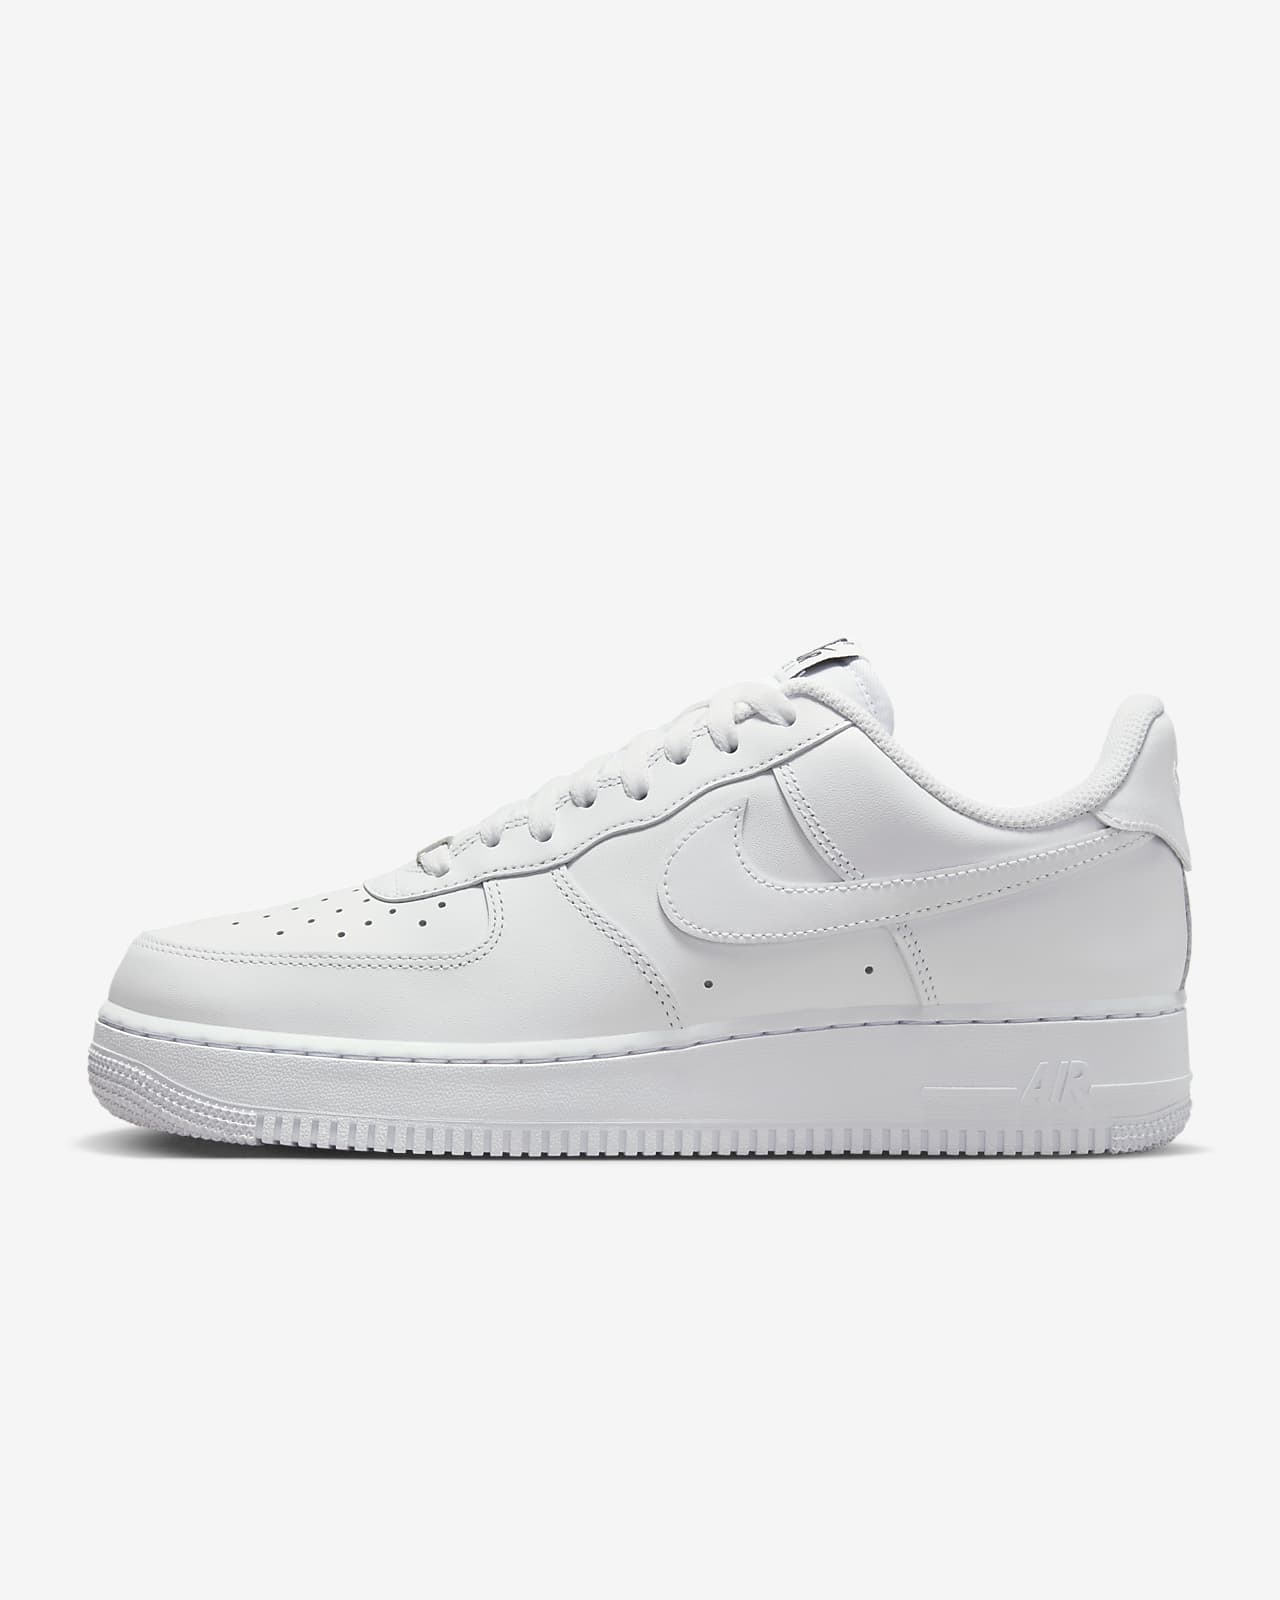 Nike Air Force 1 '07 Flyease Men'S Shoes. Nike Vn